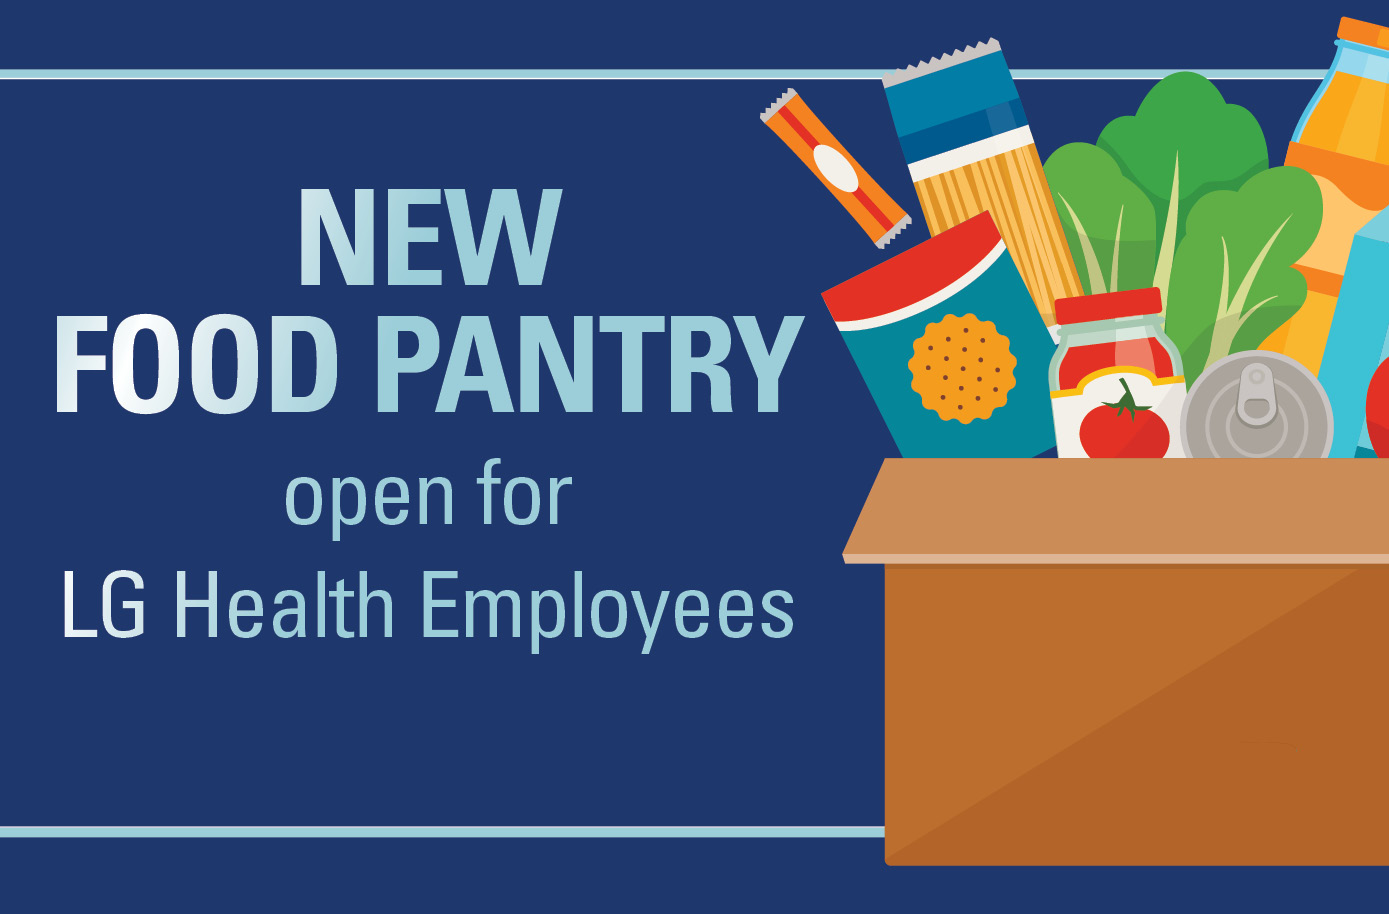 New Food Pantry open for LG Health Employees